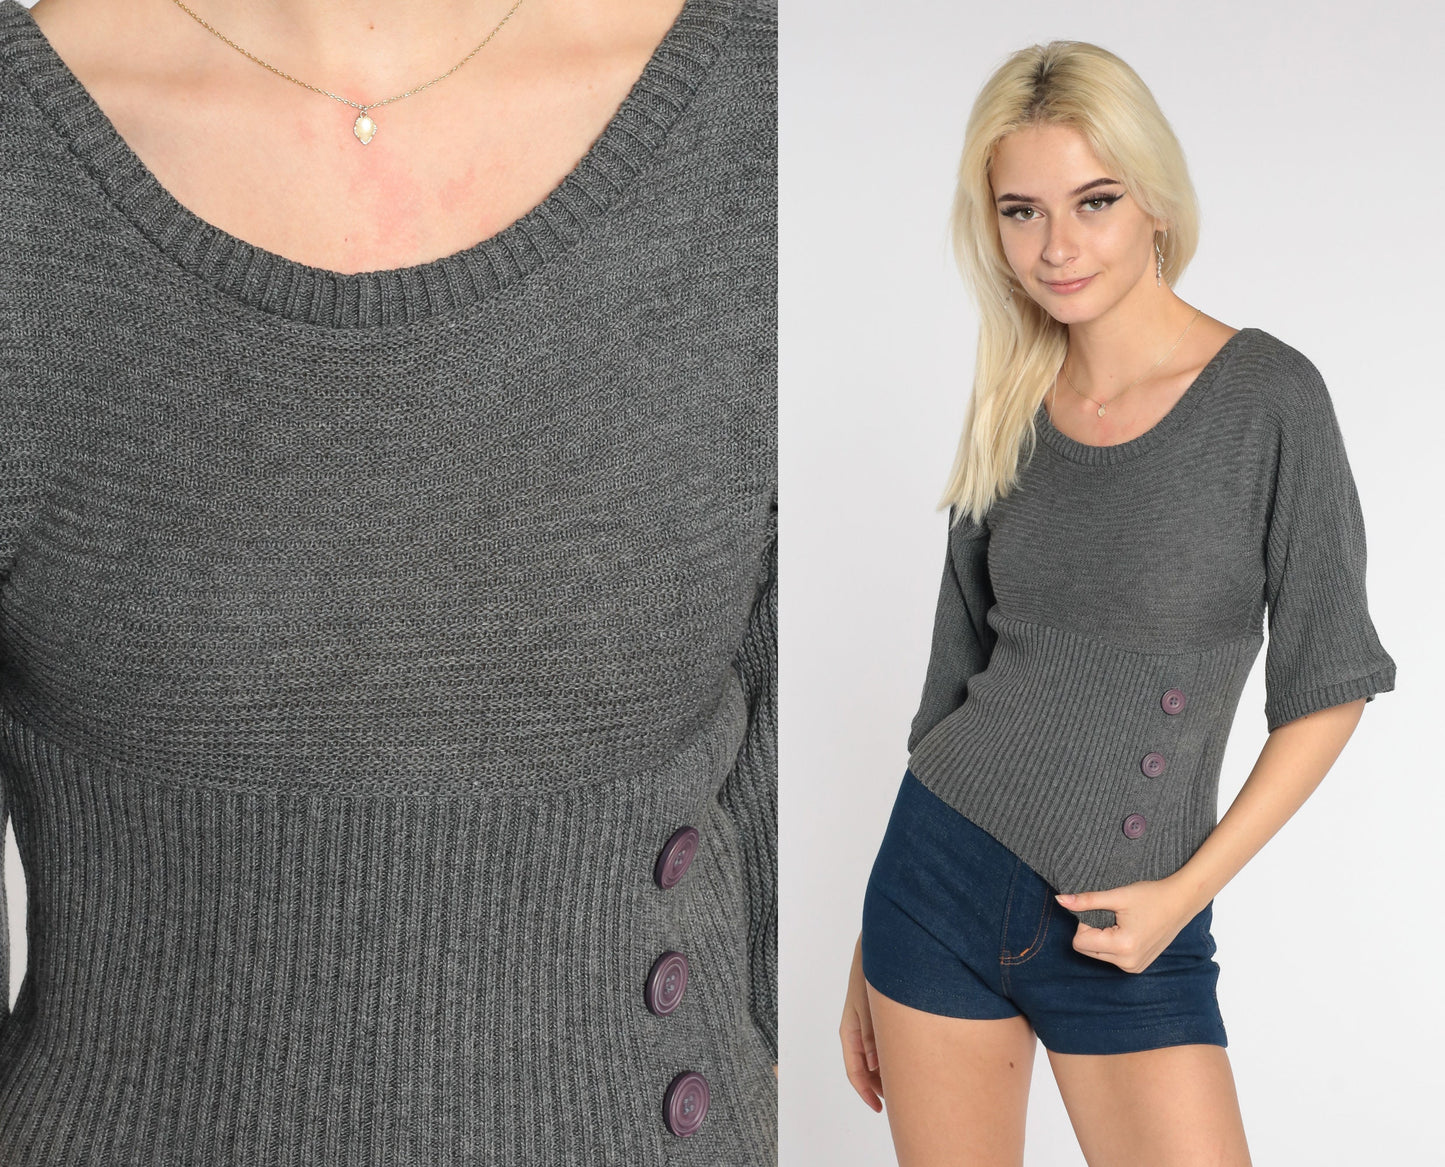 Grey Knit Shirt Y2K Sweater Top Plain Retro Short Wide Sleeve Blouse Simple Basic Casual Plain Charcoal Blouse Vintage 00s Acrylic Small S